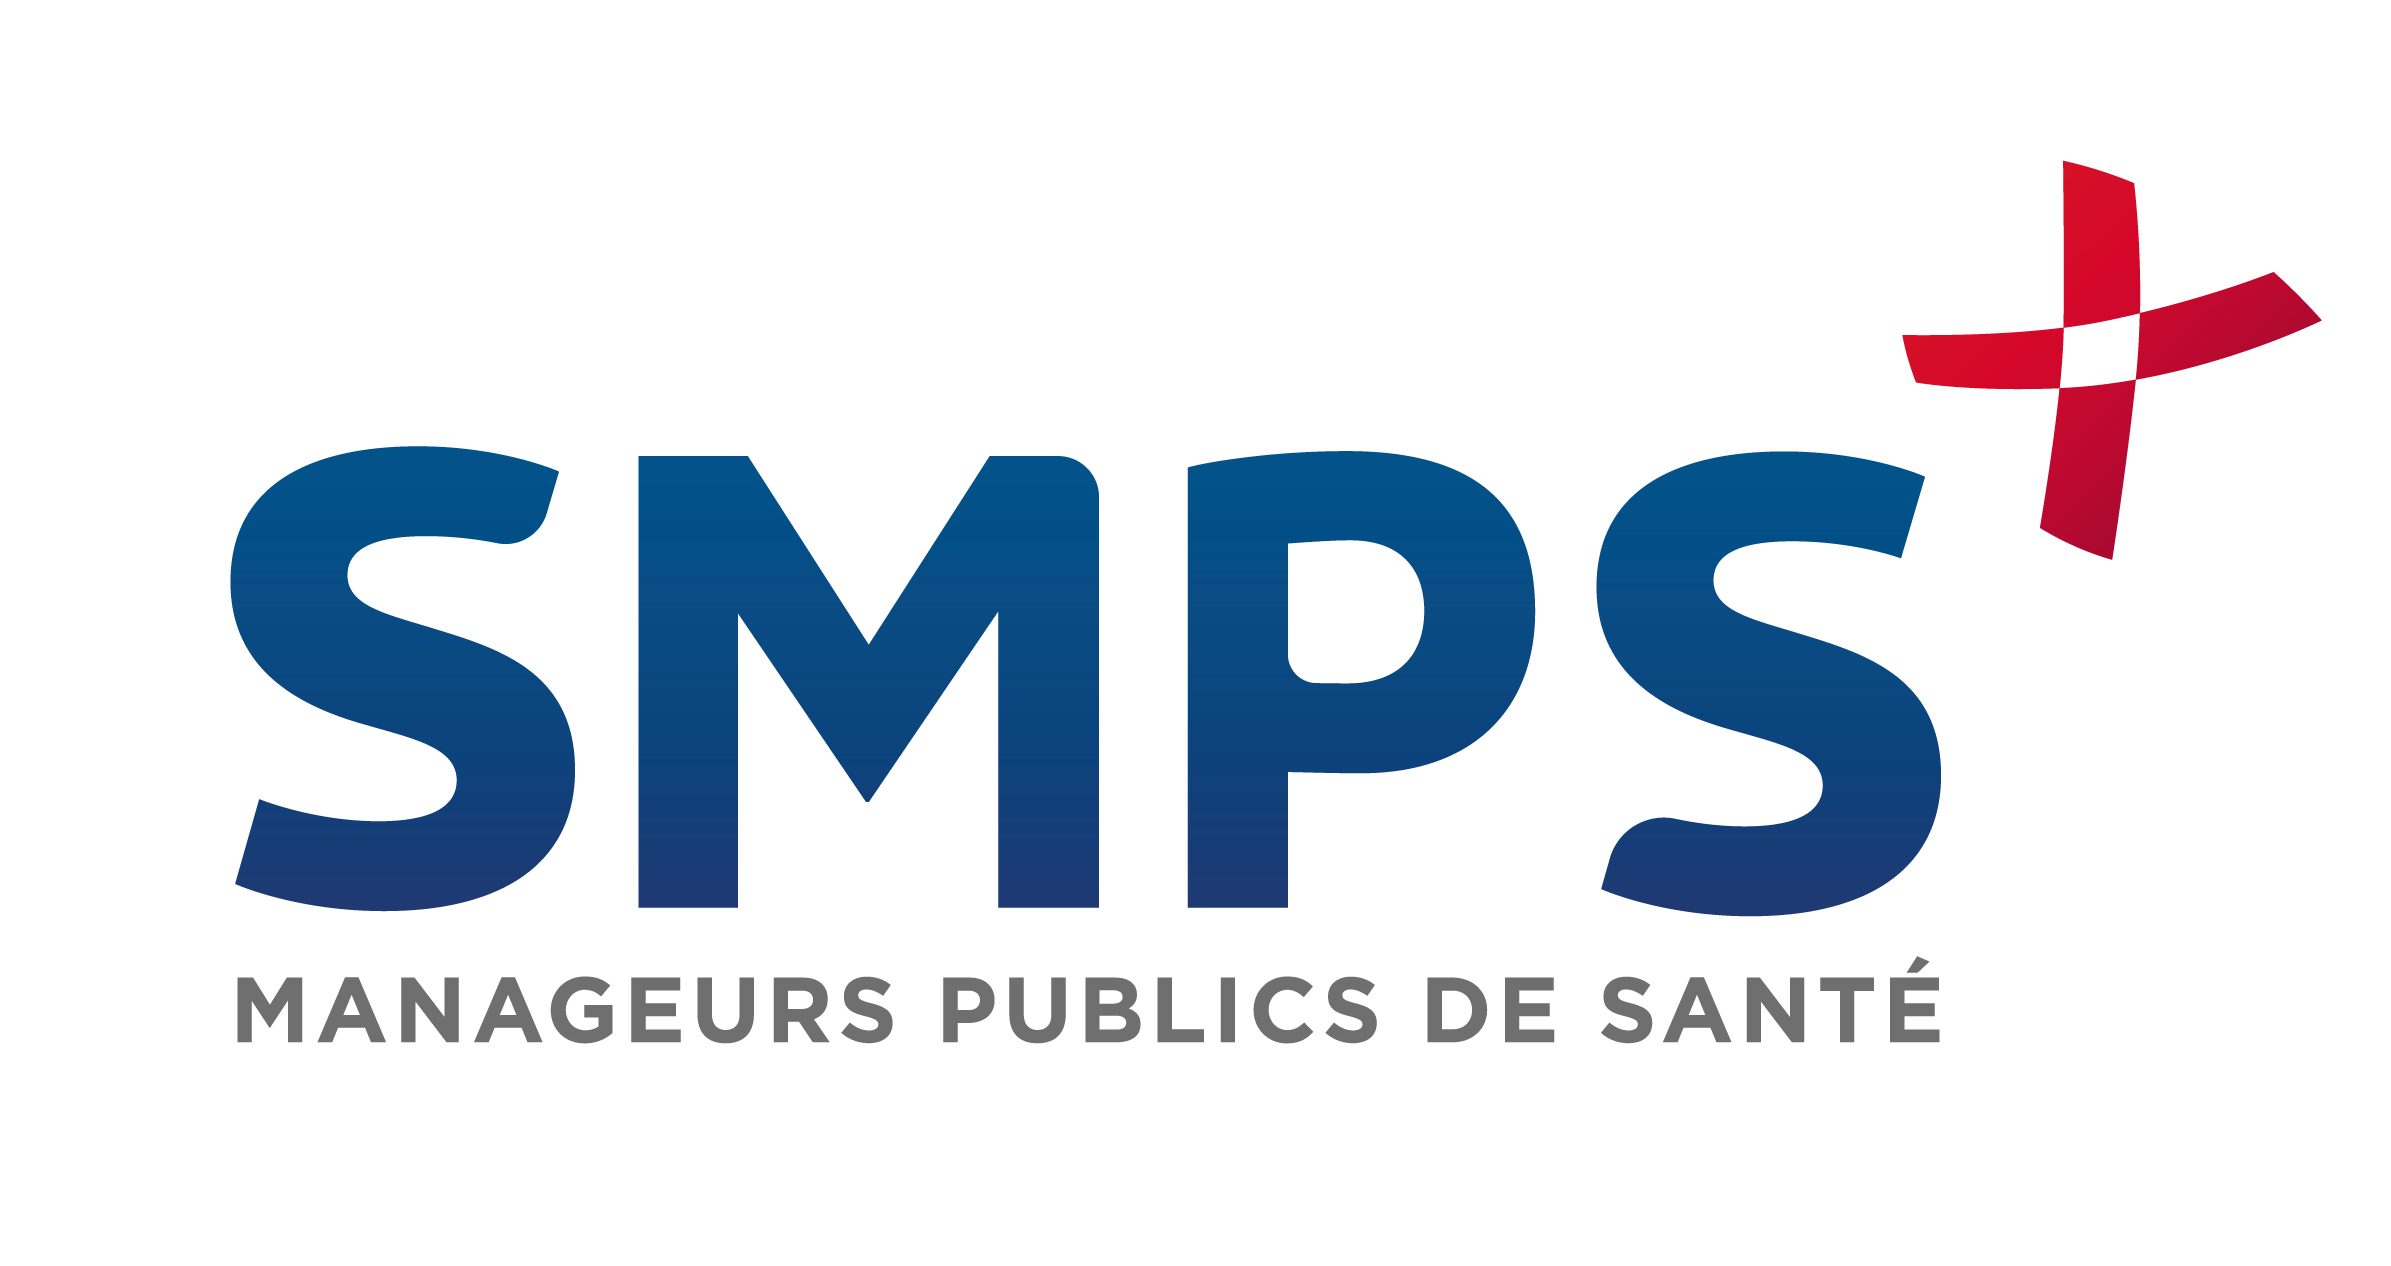 SMPS